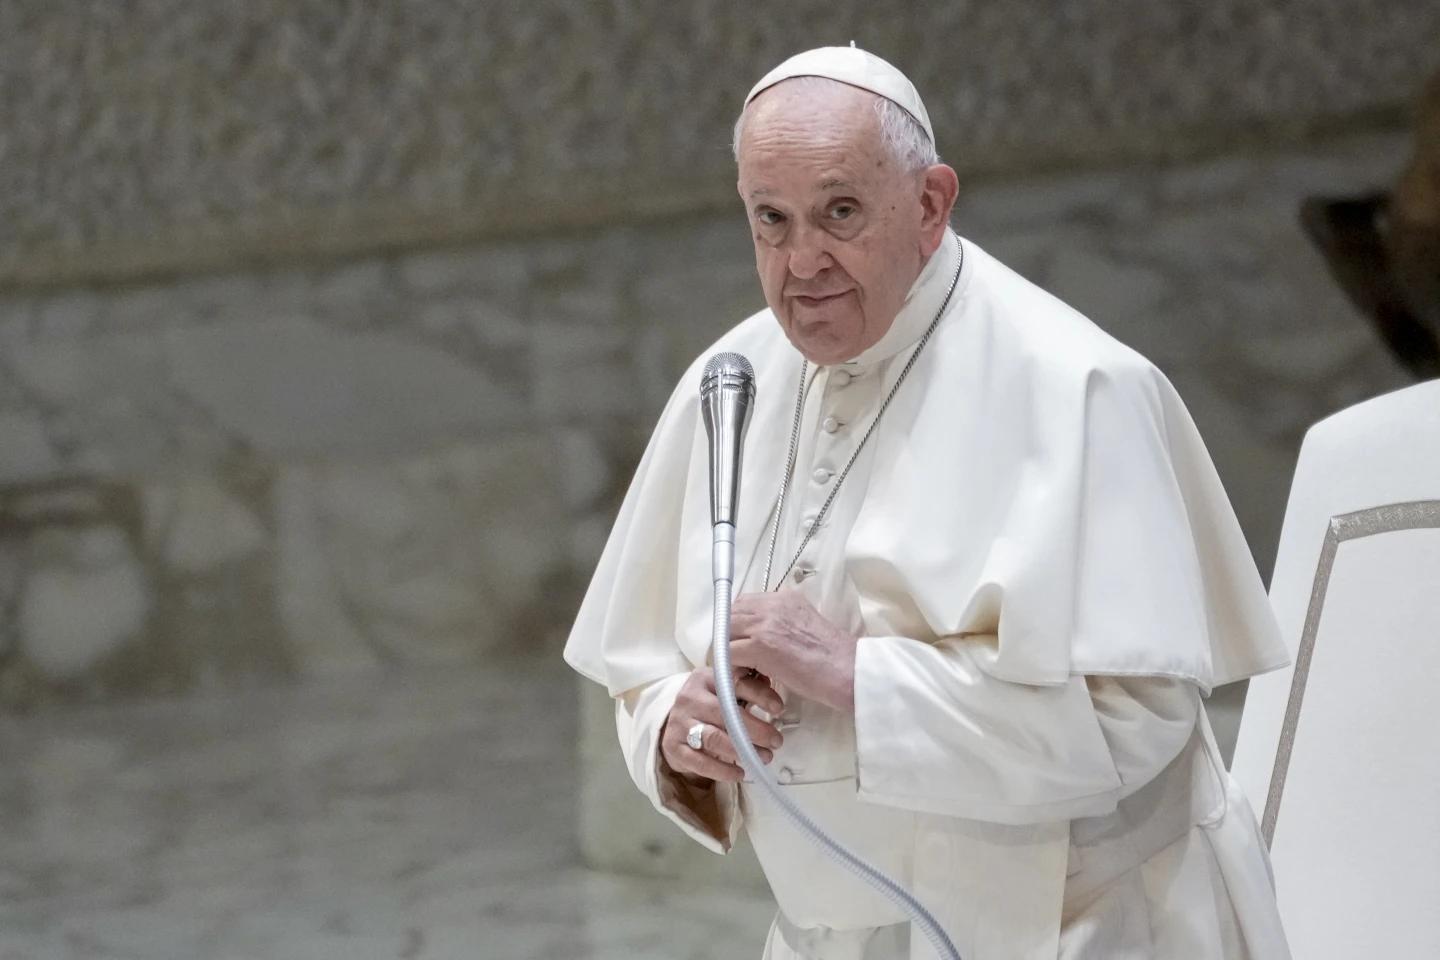 Pope offers cautious ‘yes’ on blessing some same-sex unions, ‘no’ on woman priests